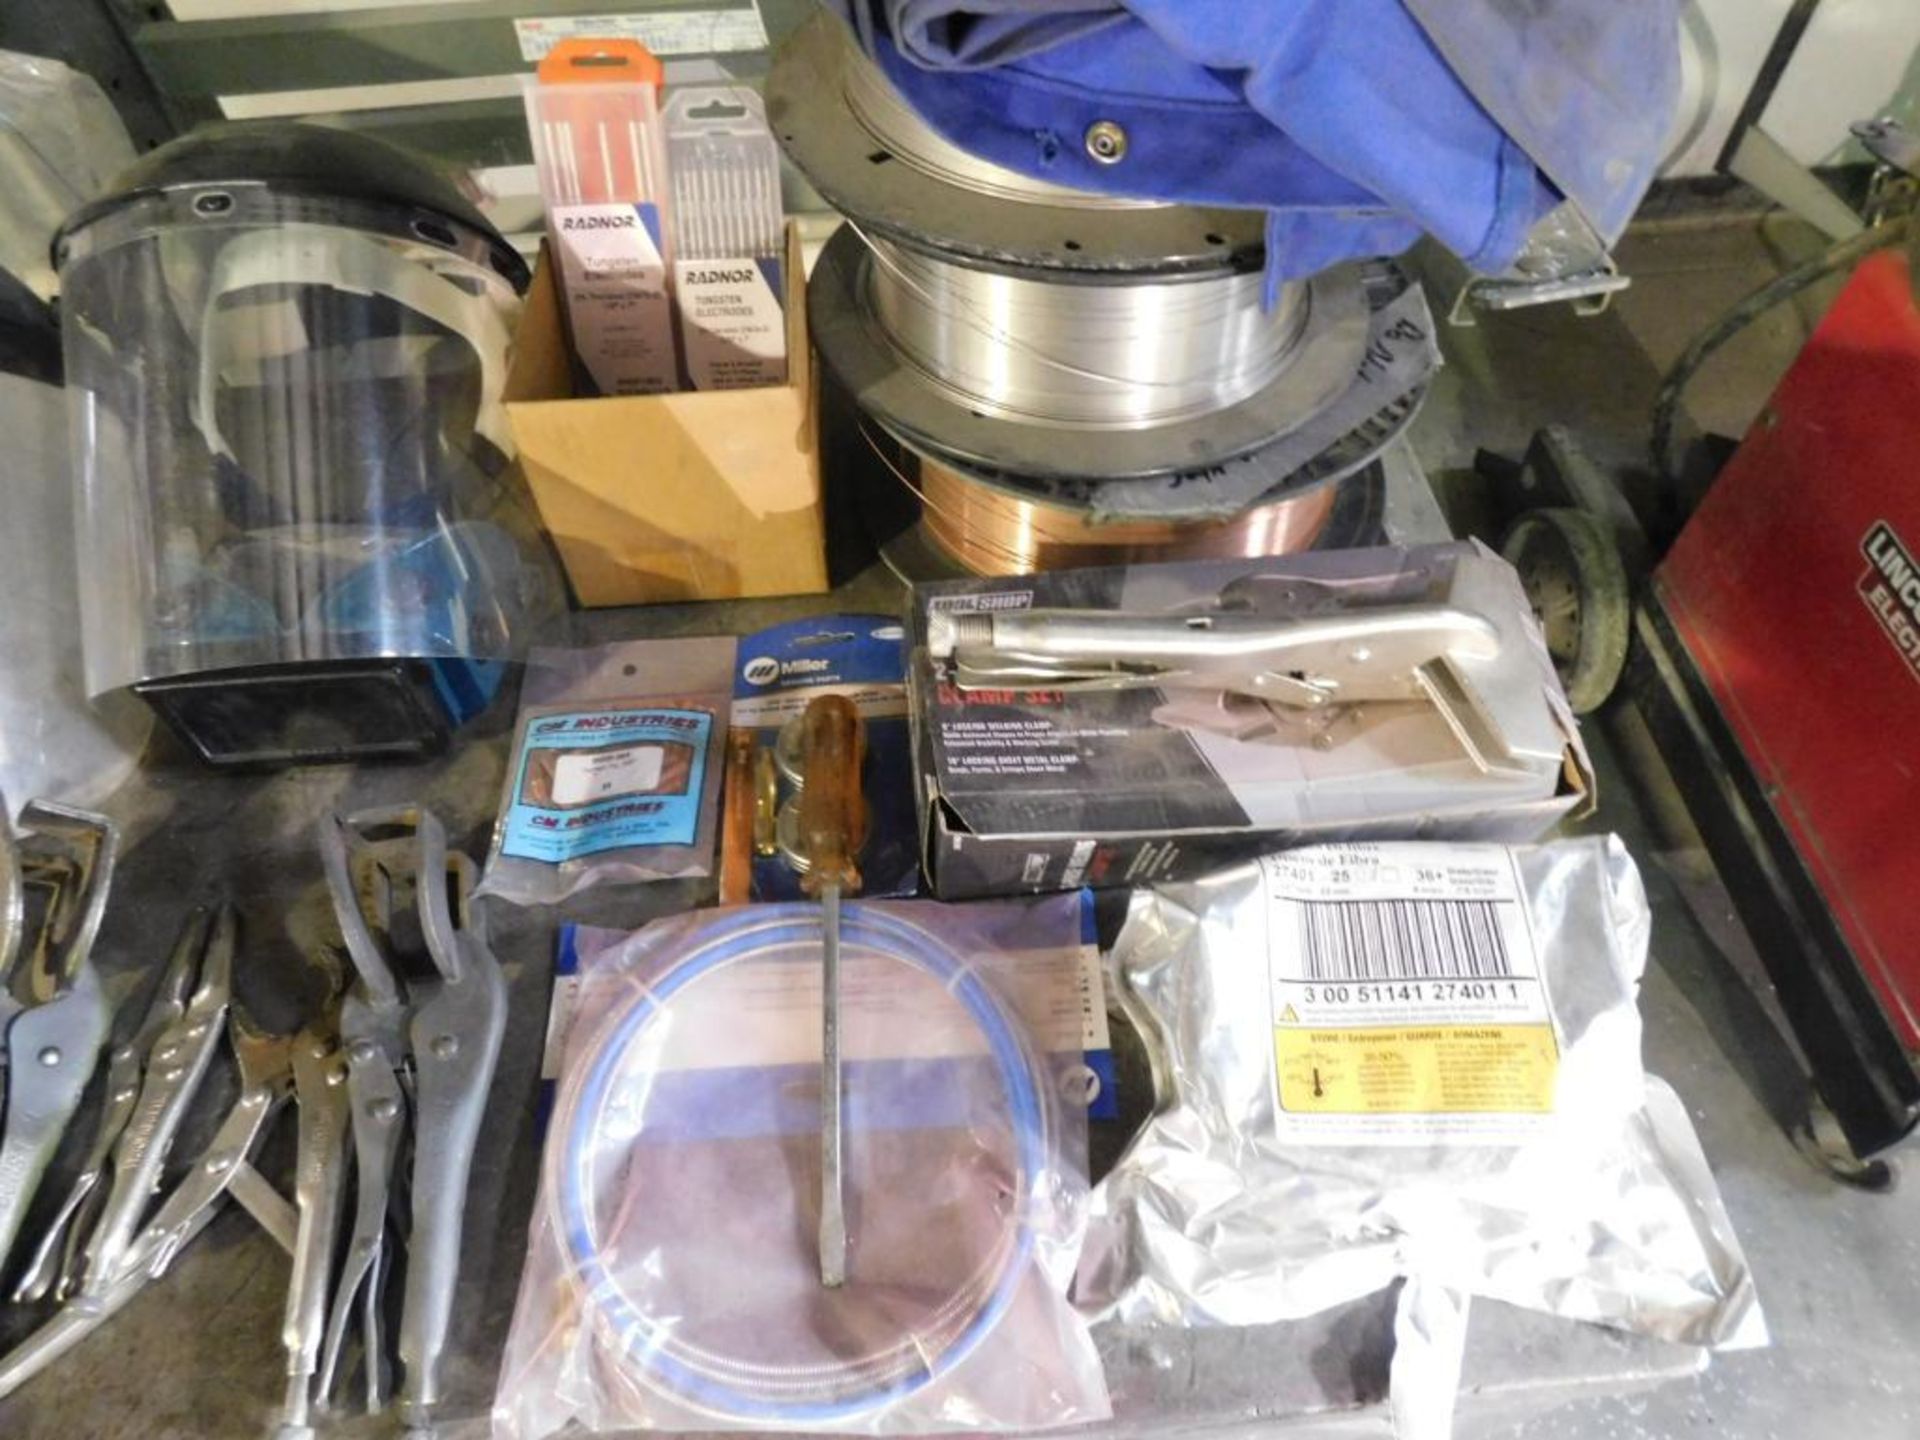 LOT: Contents of Cart including Welding Supplies & Gear, (3) Rolls of Welding Wire, Clamps, Face Shi - Image 3 of 5